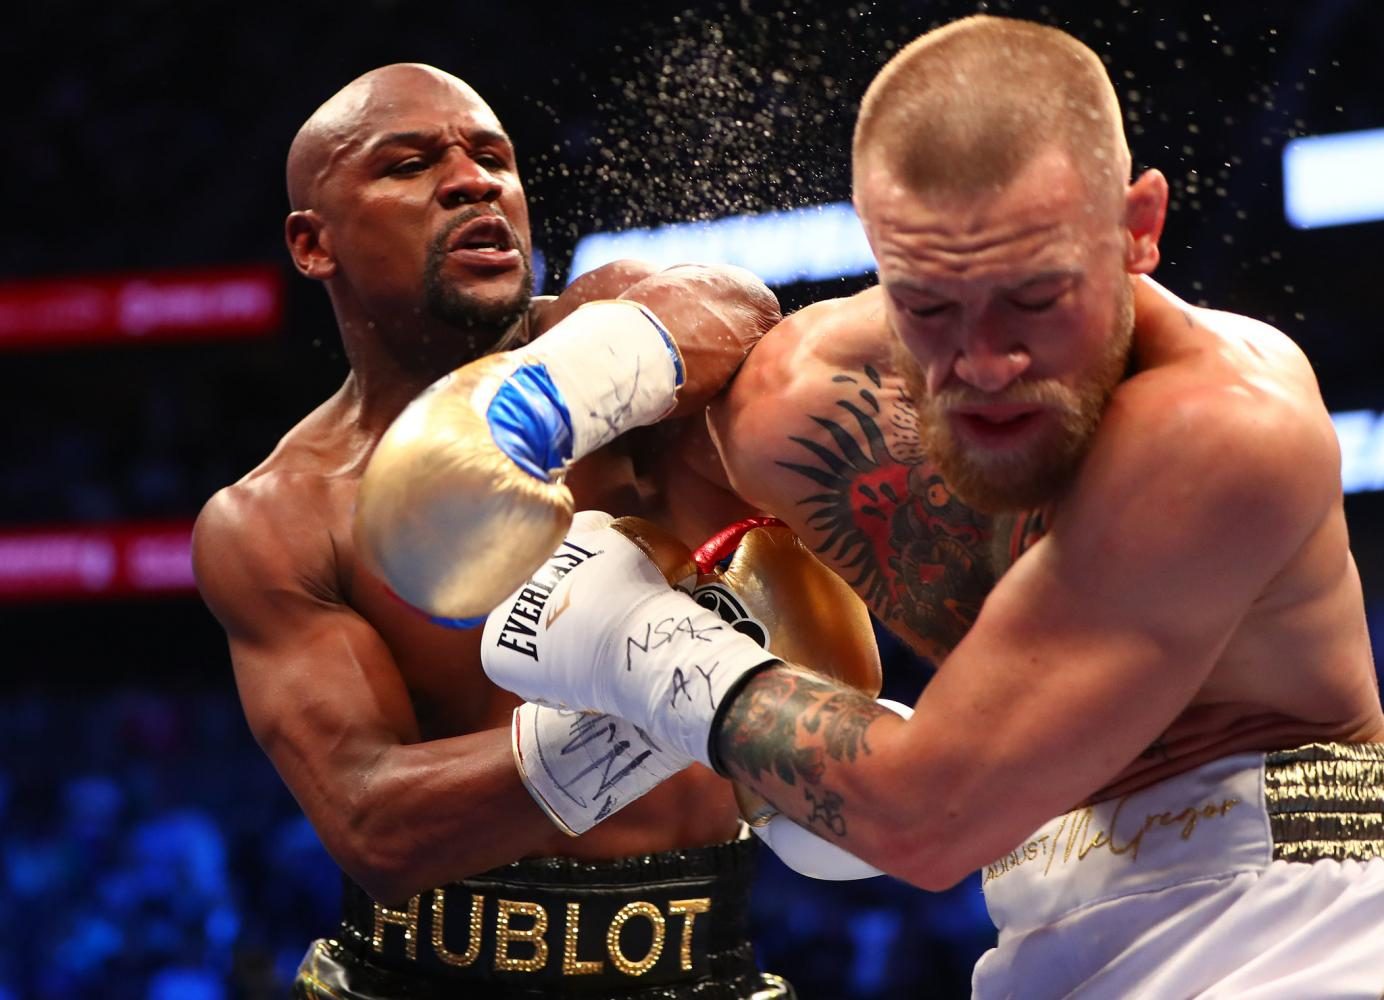 Floyd Mayweather landing a punch against Conor McGregor.